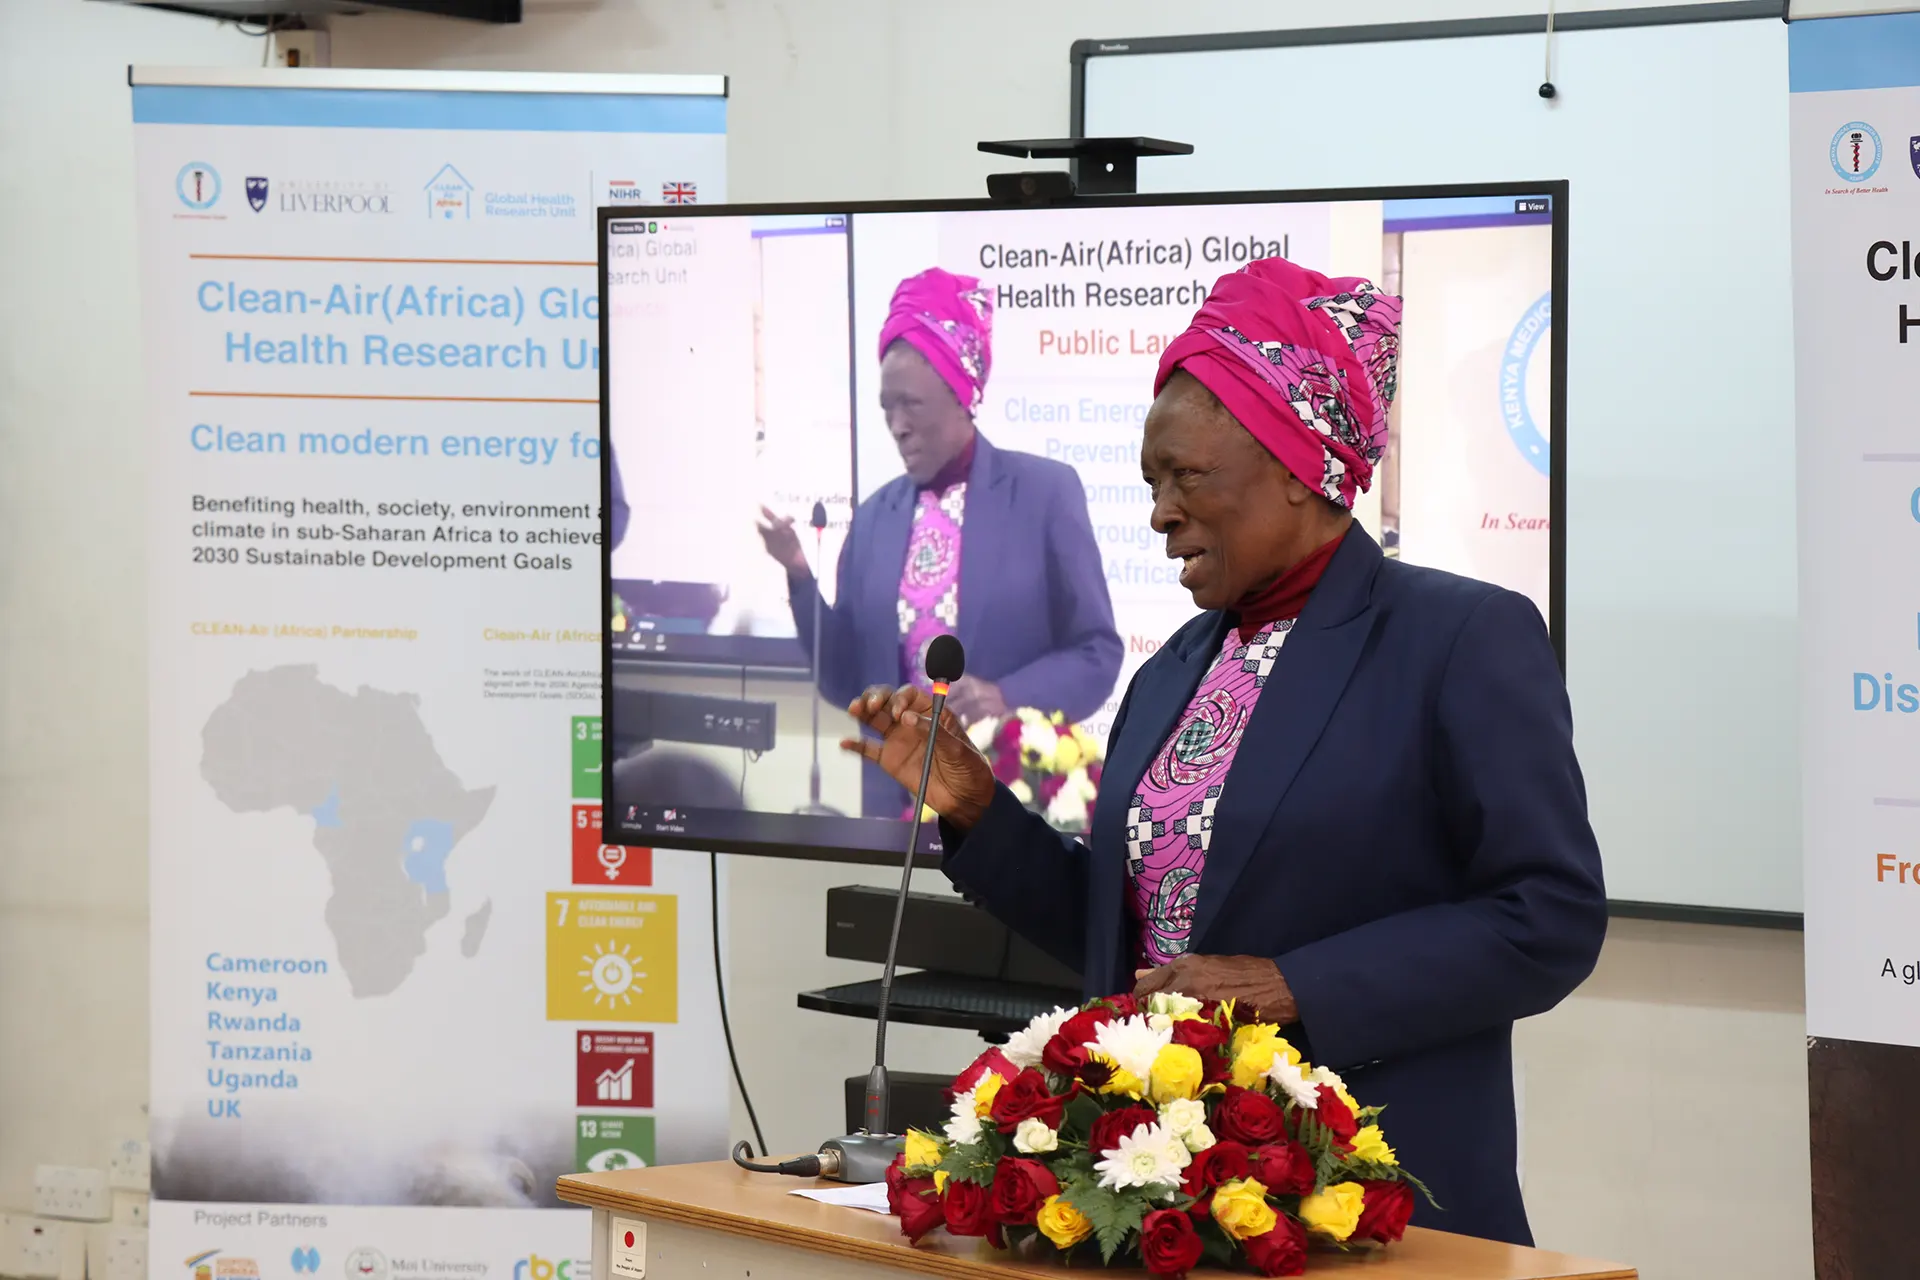 Clean-Air(Africa) Goodwill Ambassador Prof. Miriam Were in her speech expressed her joy at being part of the CAA team highlighting the key to successful implementation of policies is through community engagement specifically through Community Health Workers